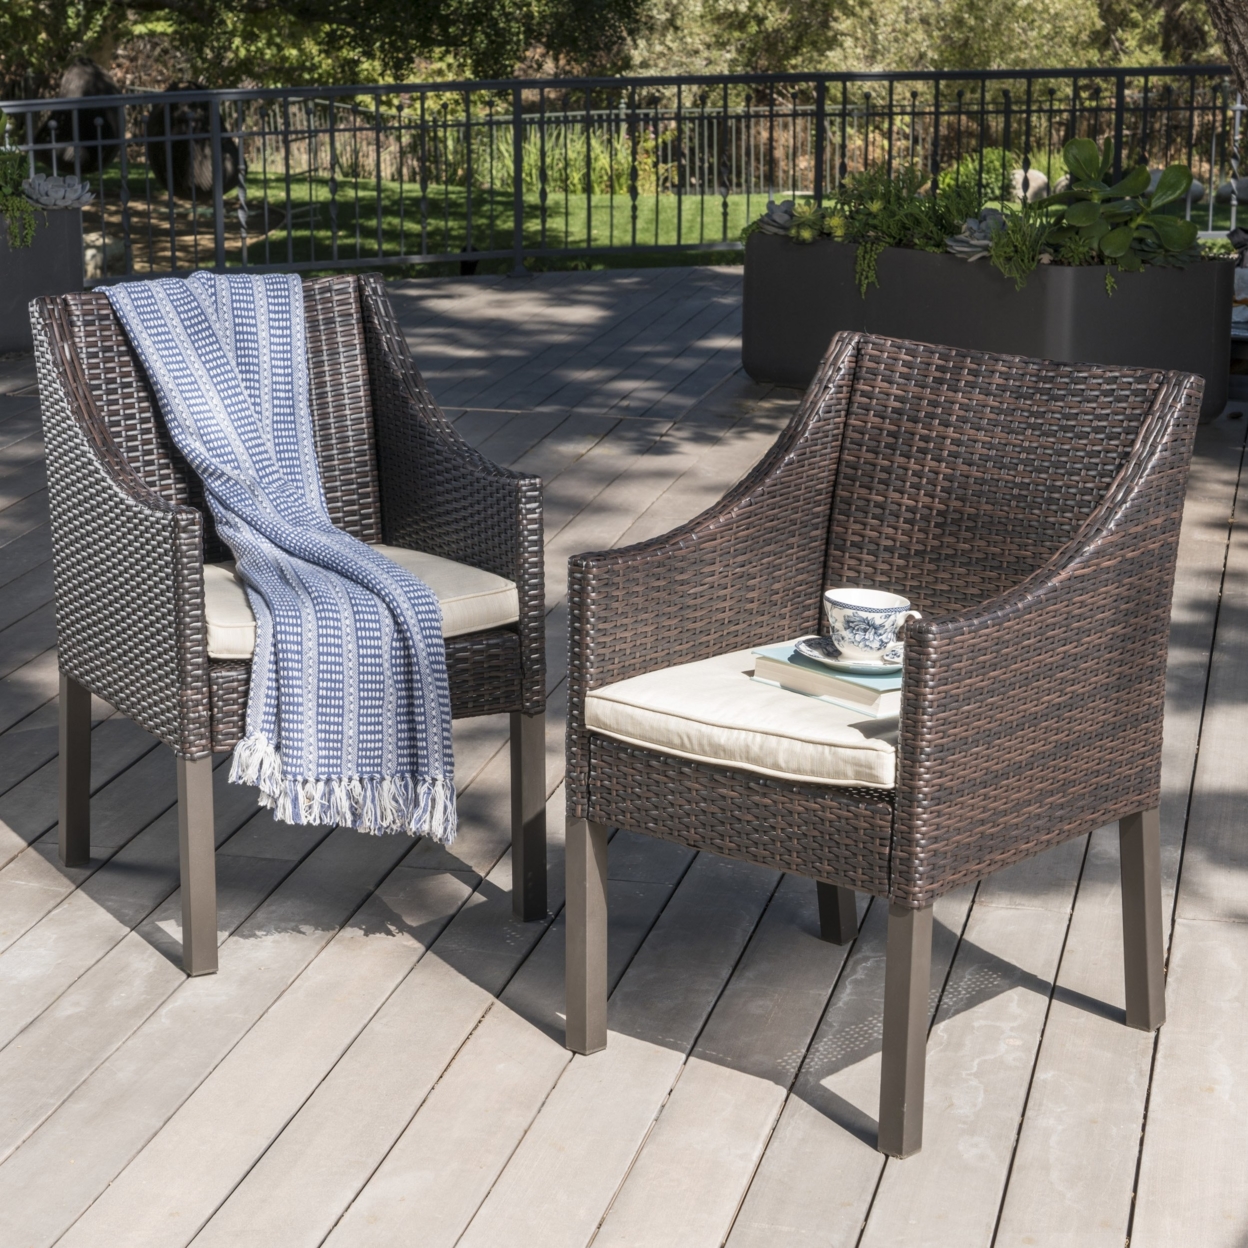 Antioch Outdoor Wicker Dining Chairs With Water Resistant Cushions (Set Of 2) - Multi-brown/Beige